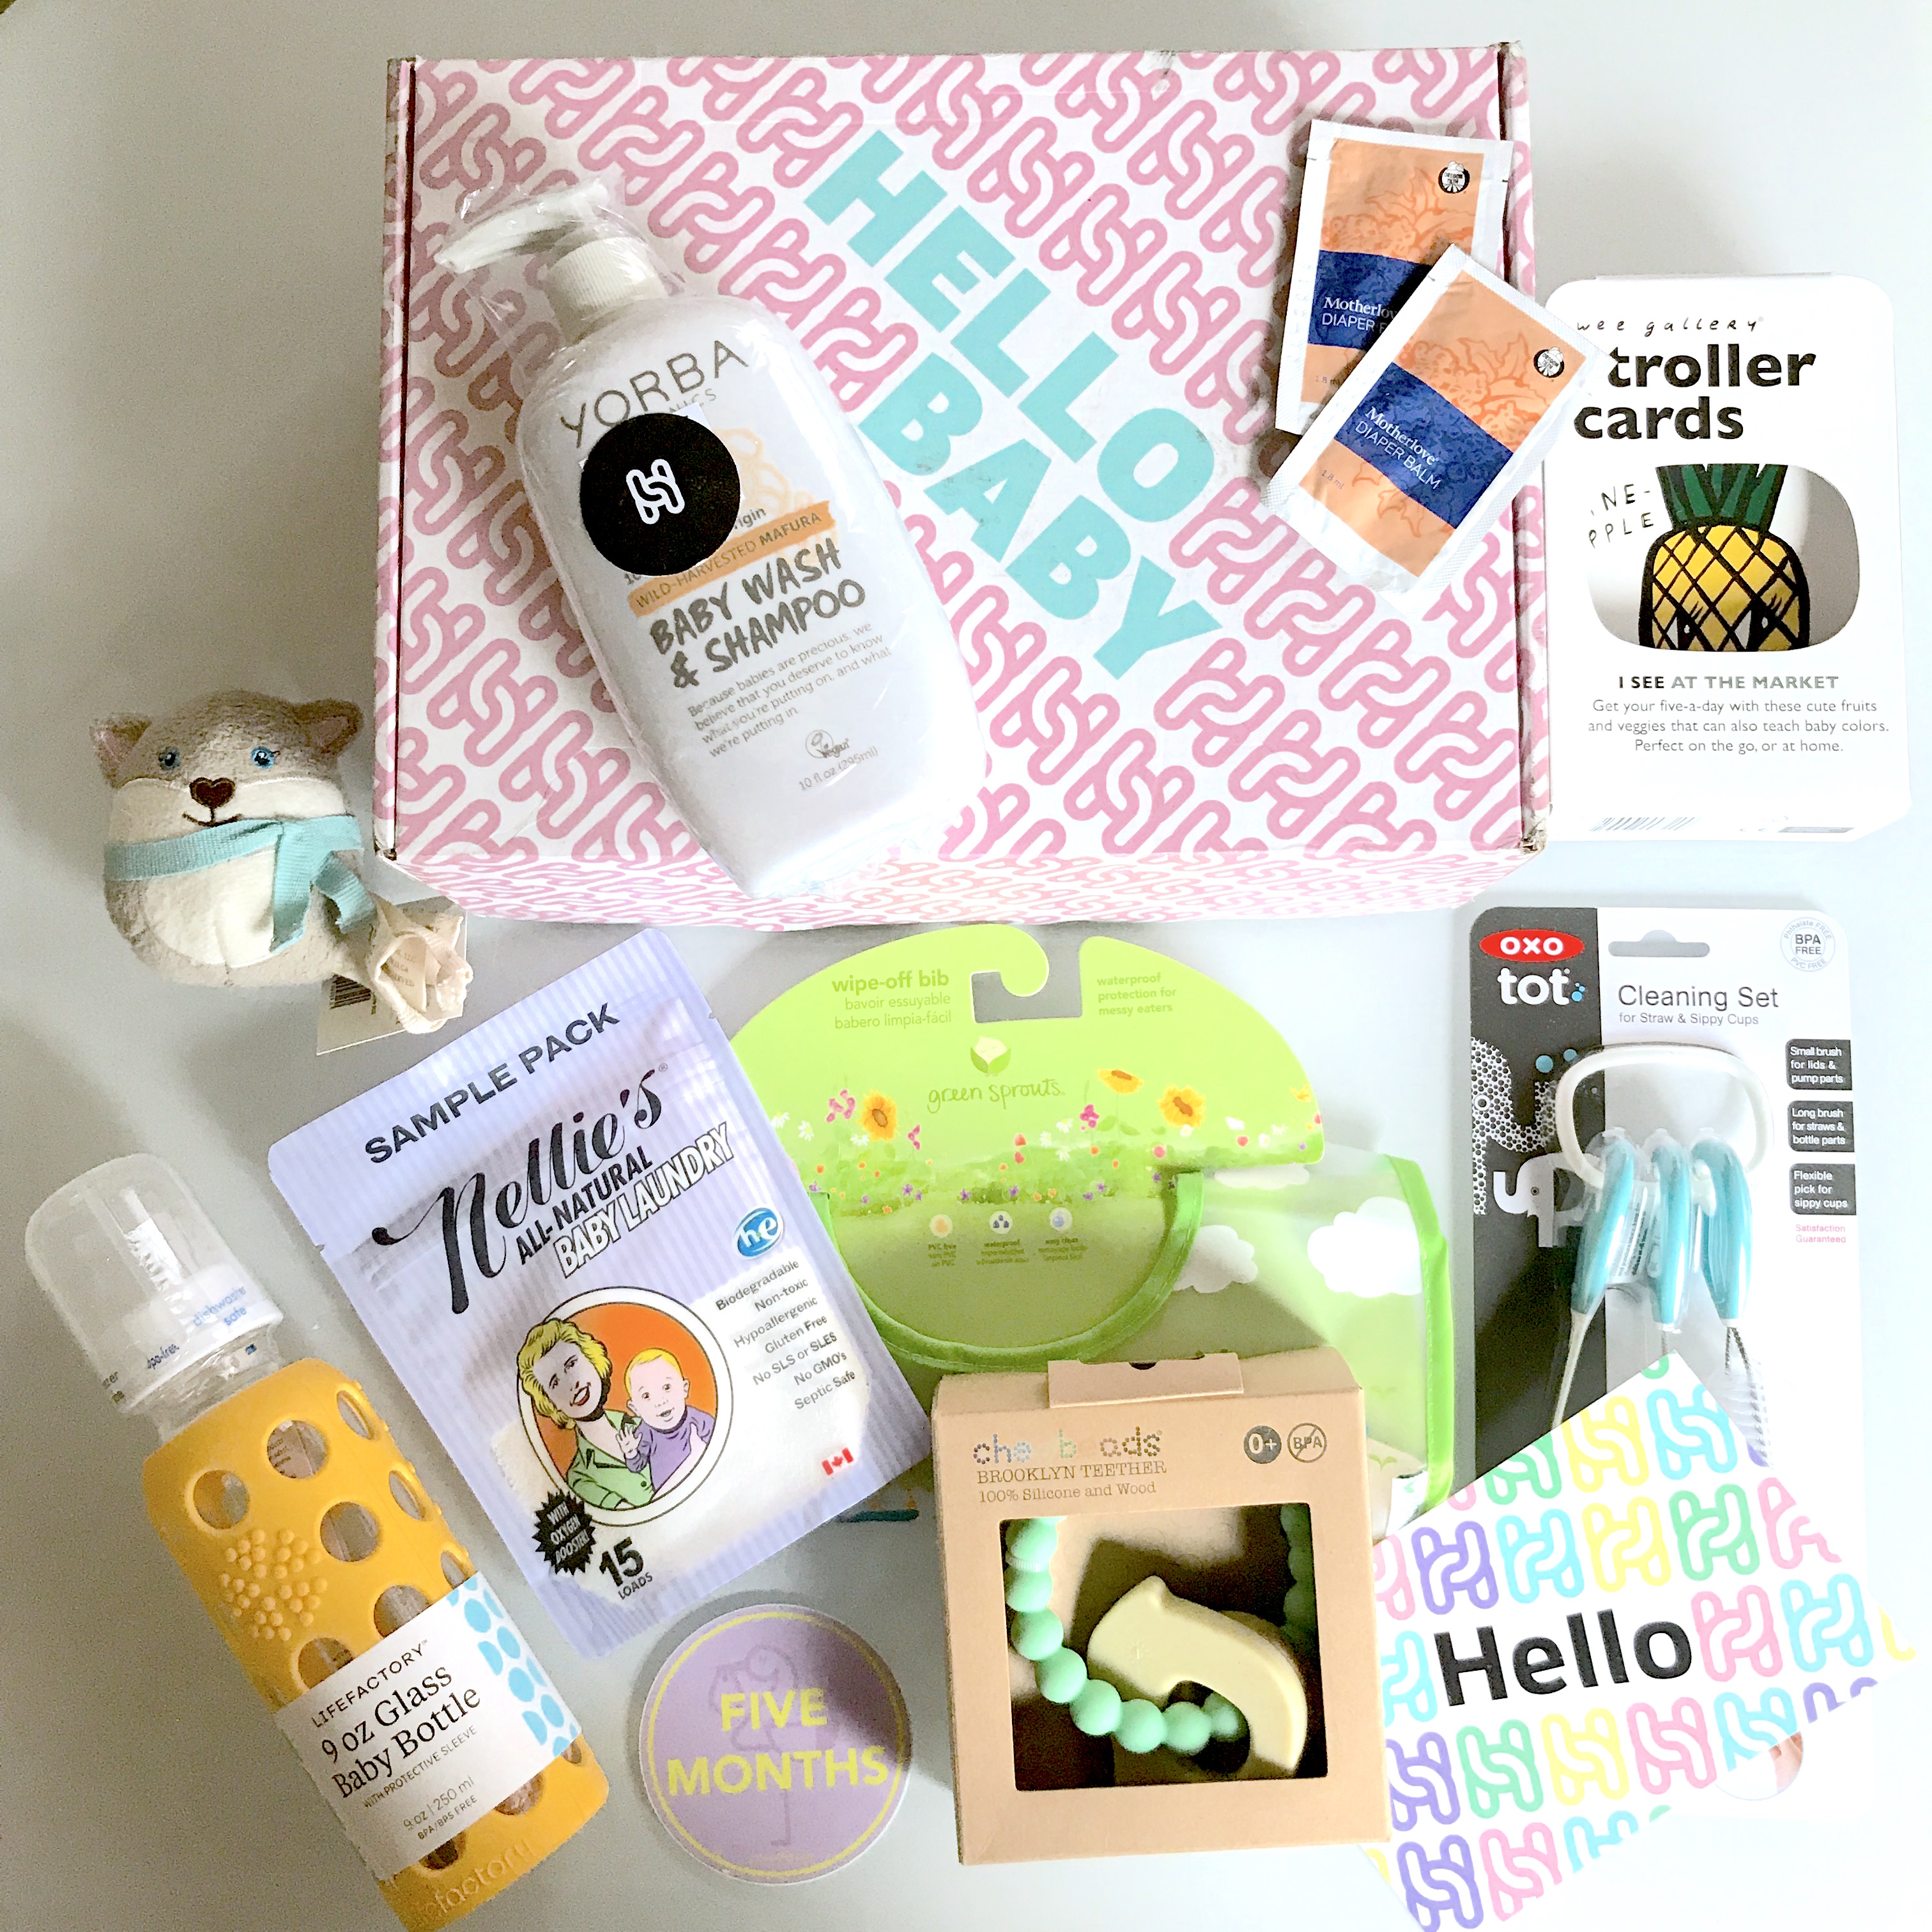 Healthiest Baby 21 Bundles February 2018 - all items